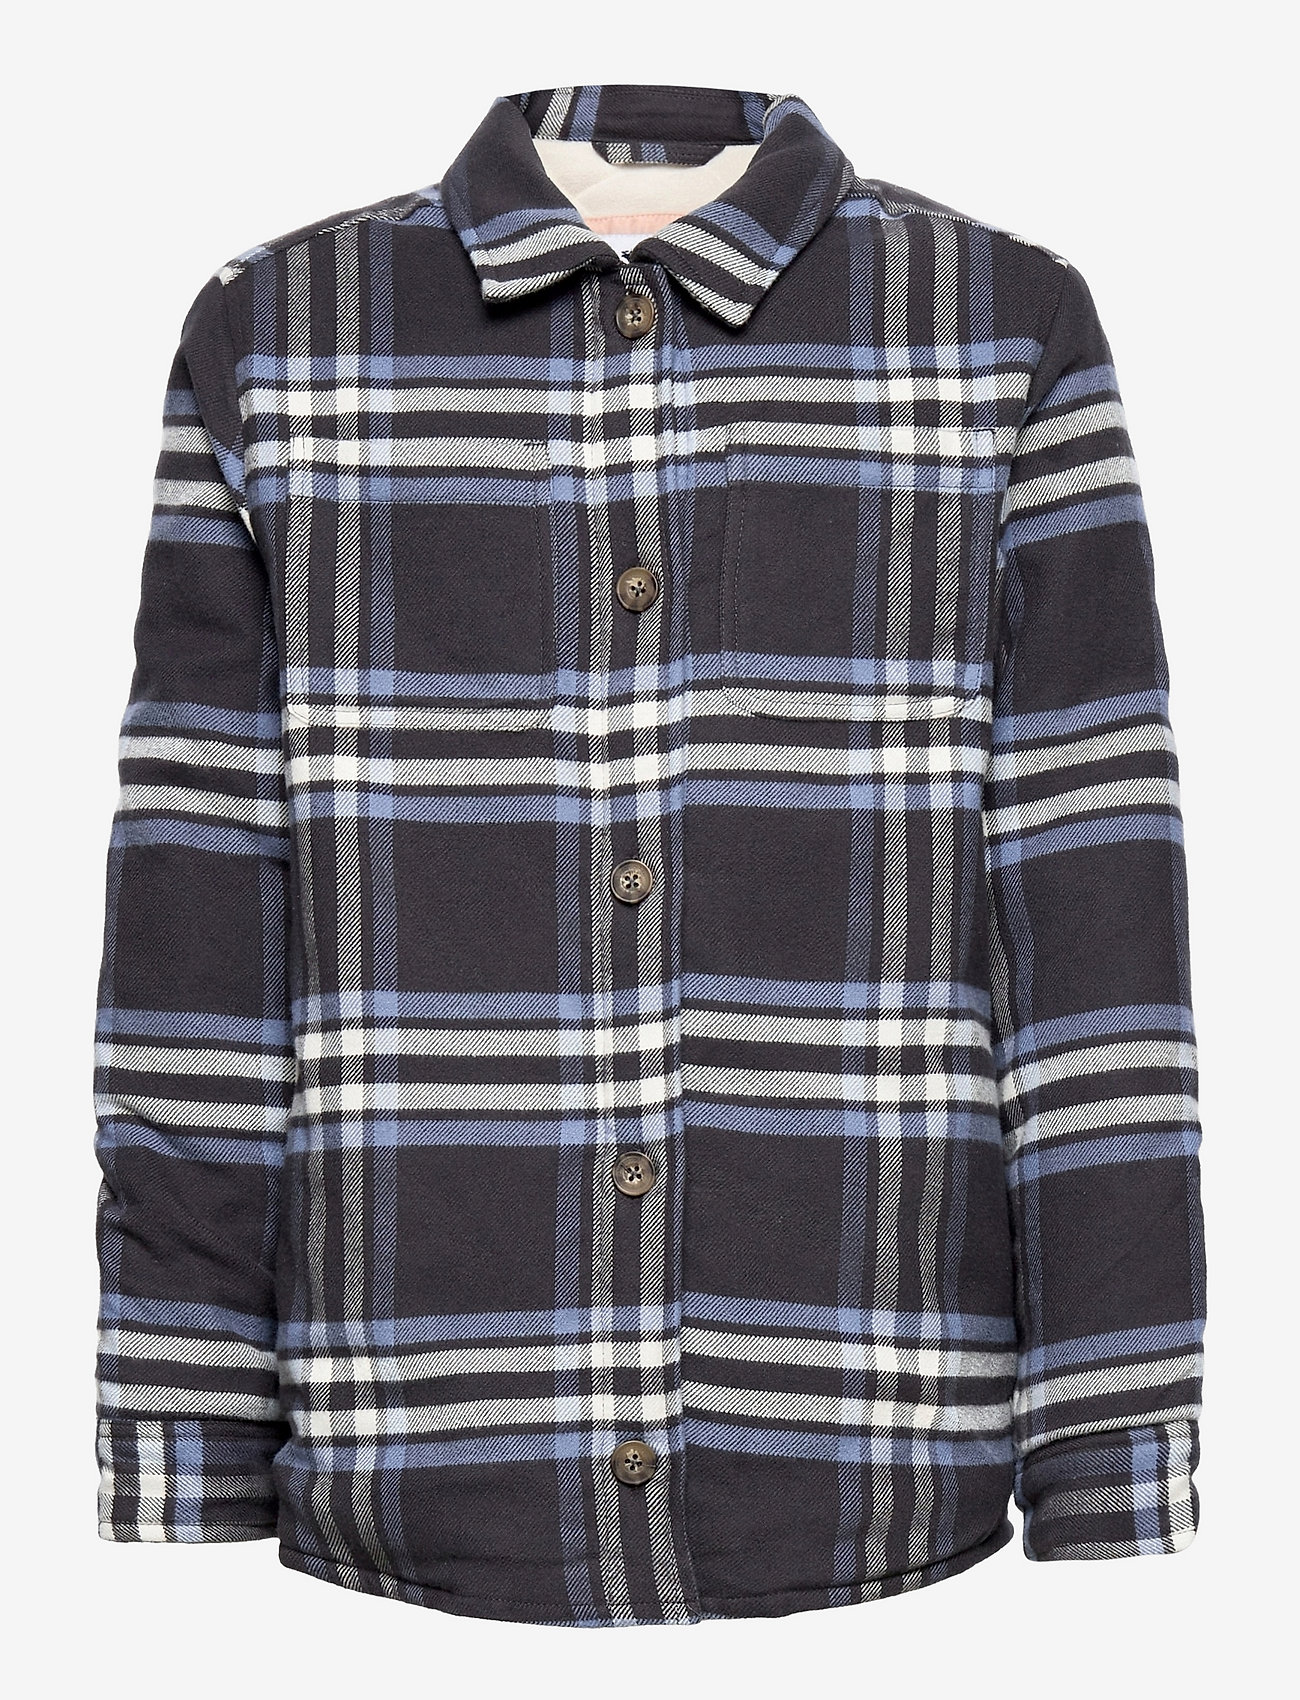 Abercrombie & Fitch - kids GIRLS OUTERWEAR - overshirts - blue black plaid - 0